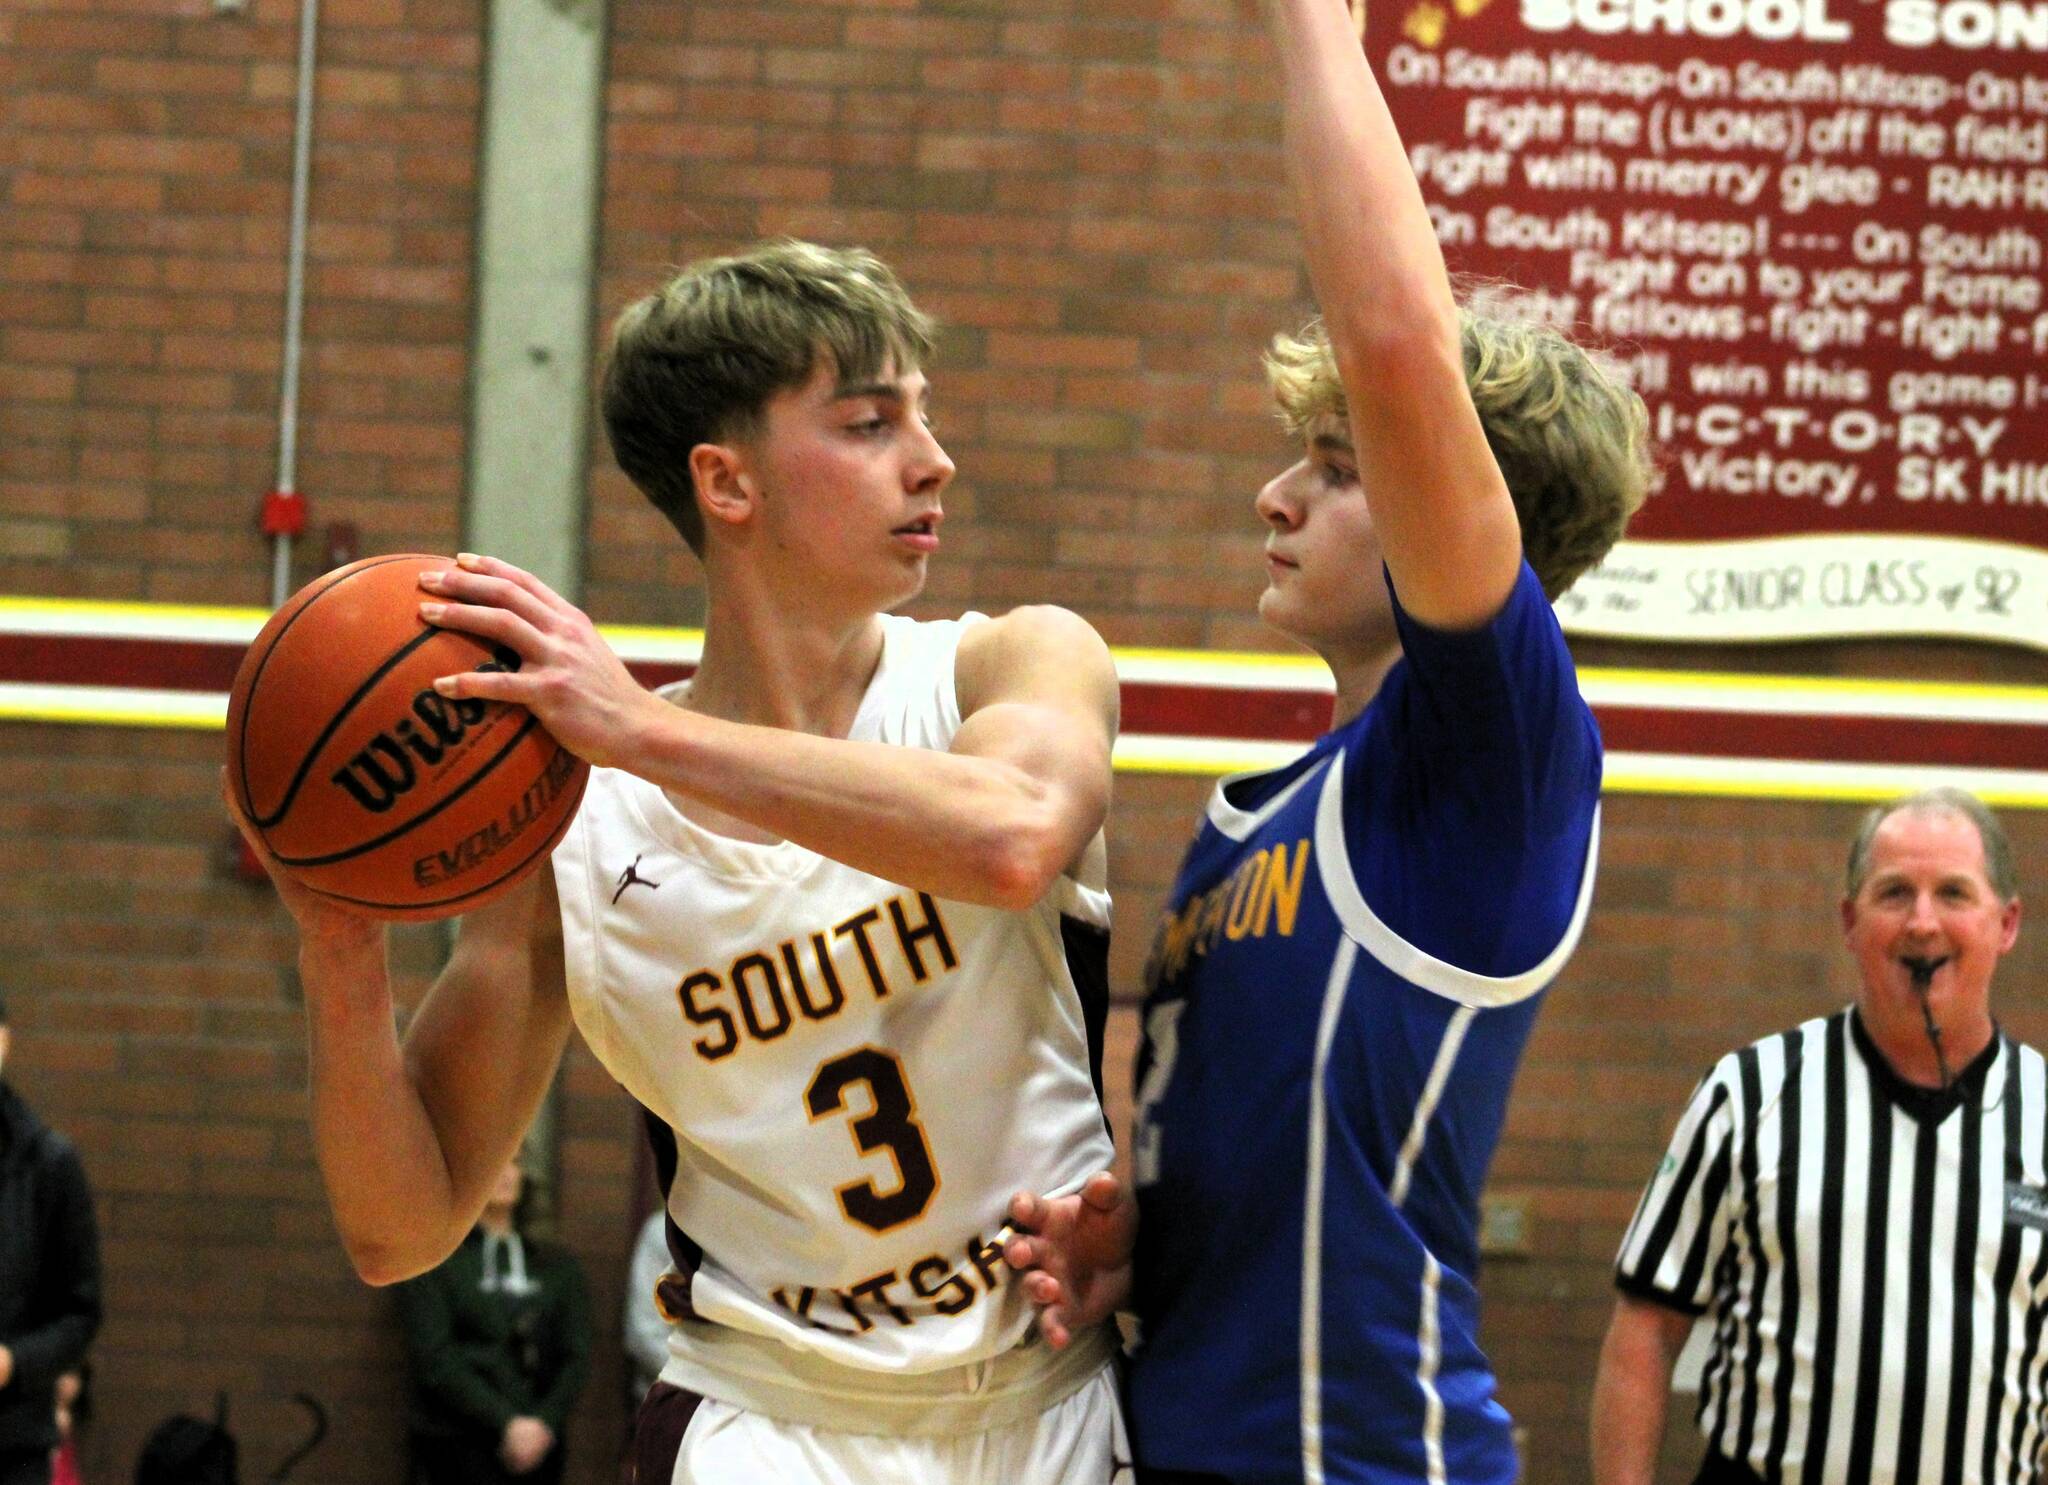 Elisha Meyer/Kitsap News Group
SK’s Michael Hulet is closely defended while he looks for a teammate to pass to.